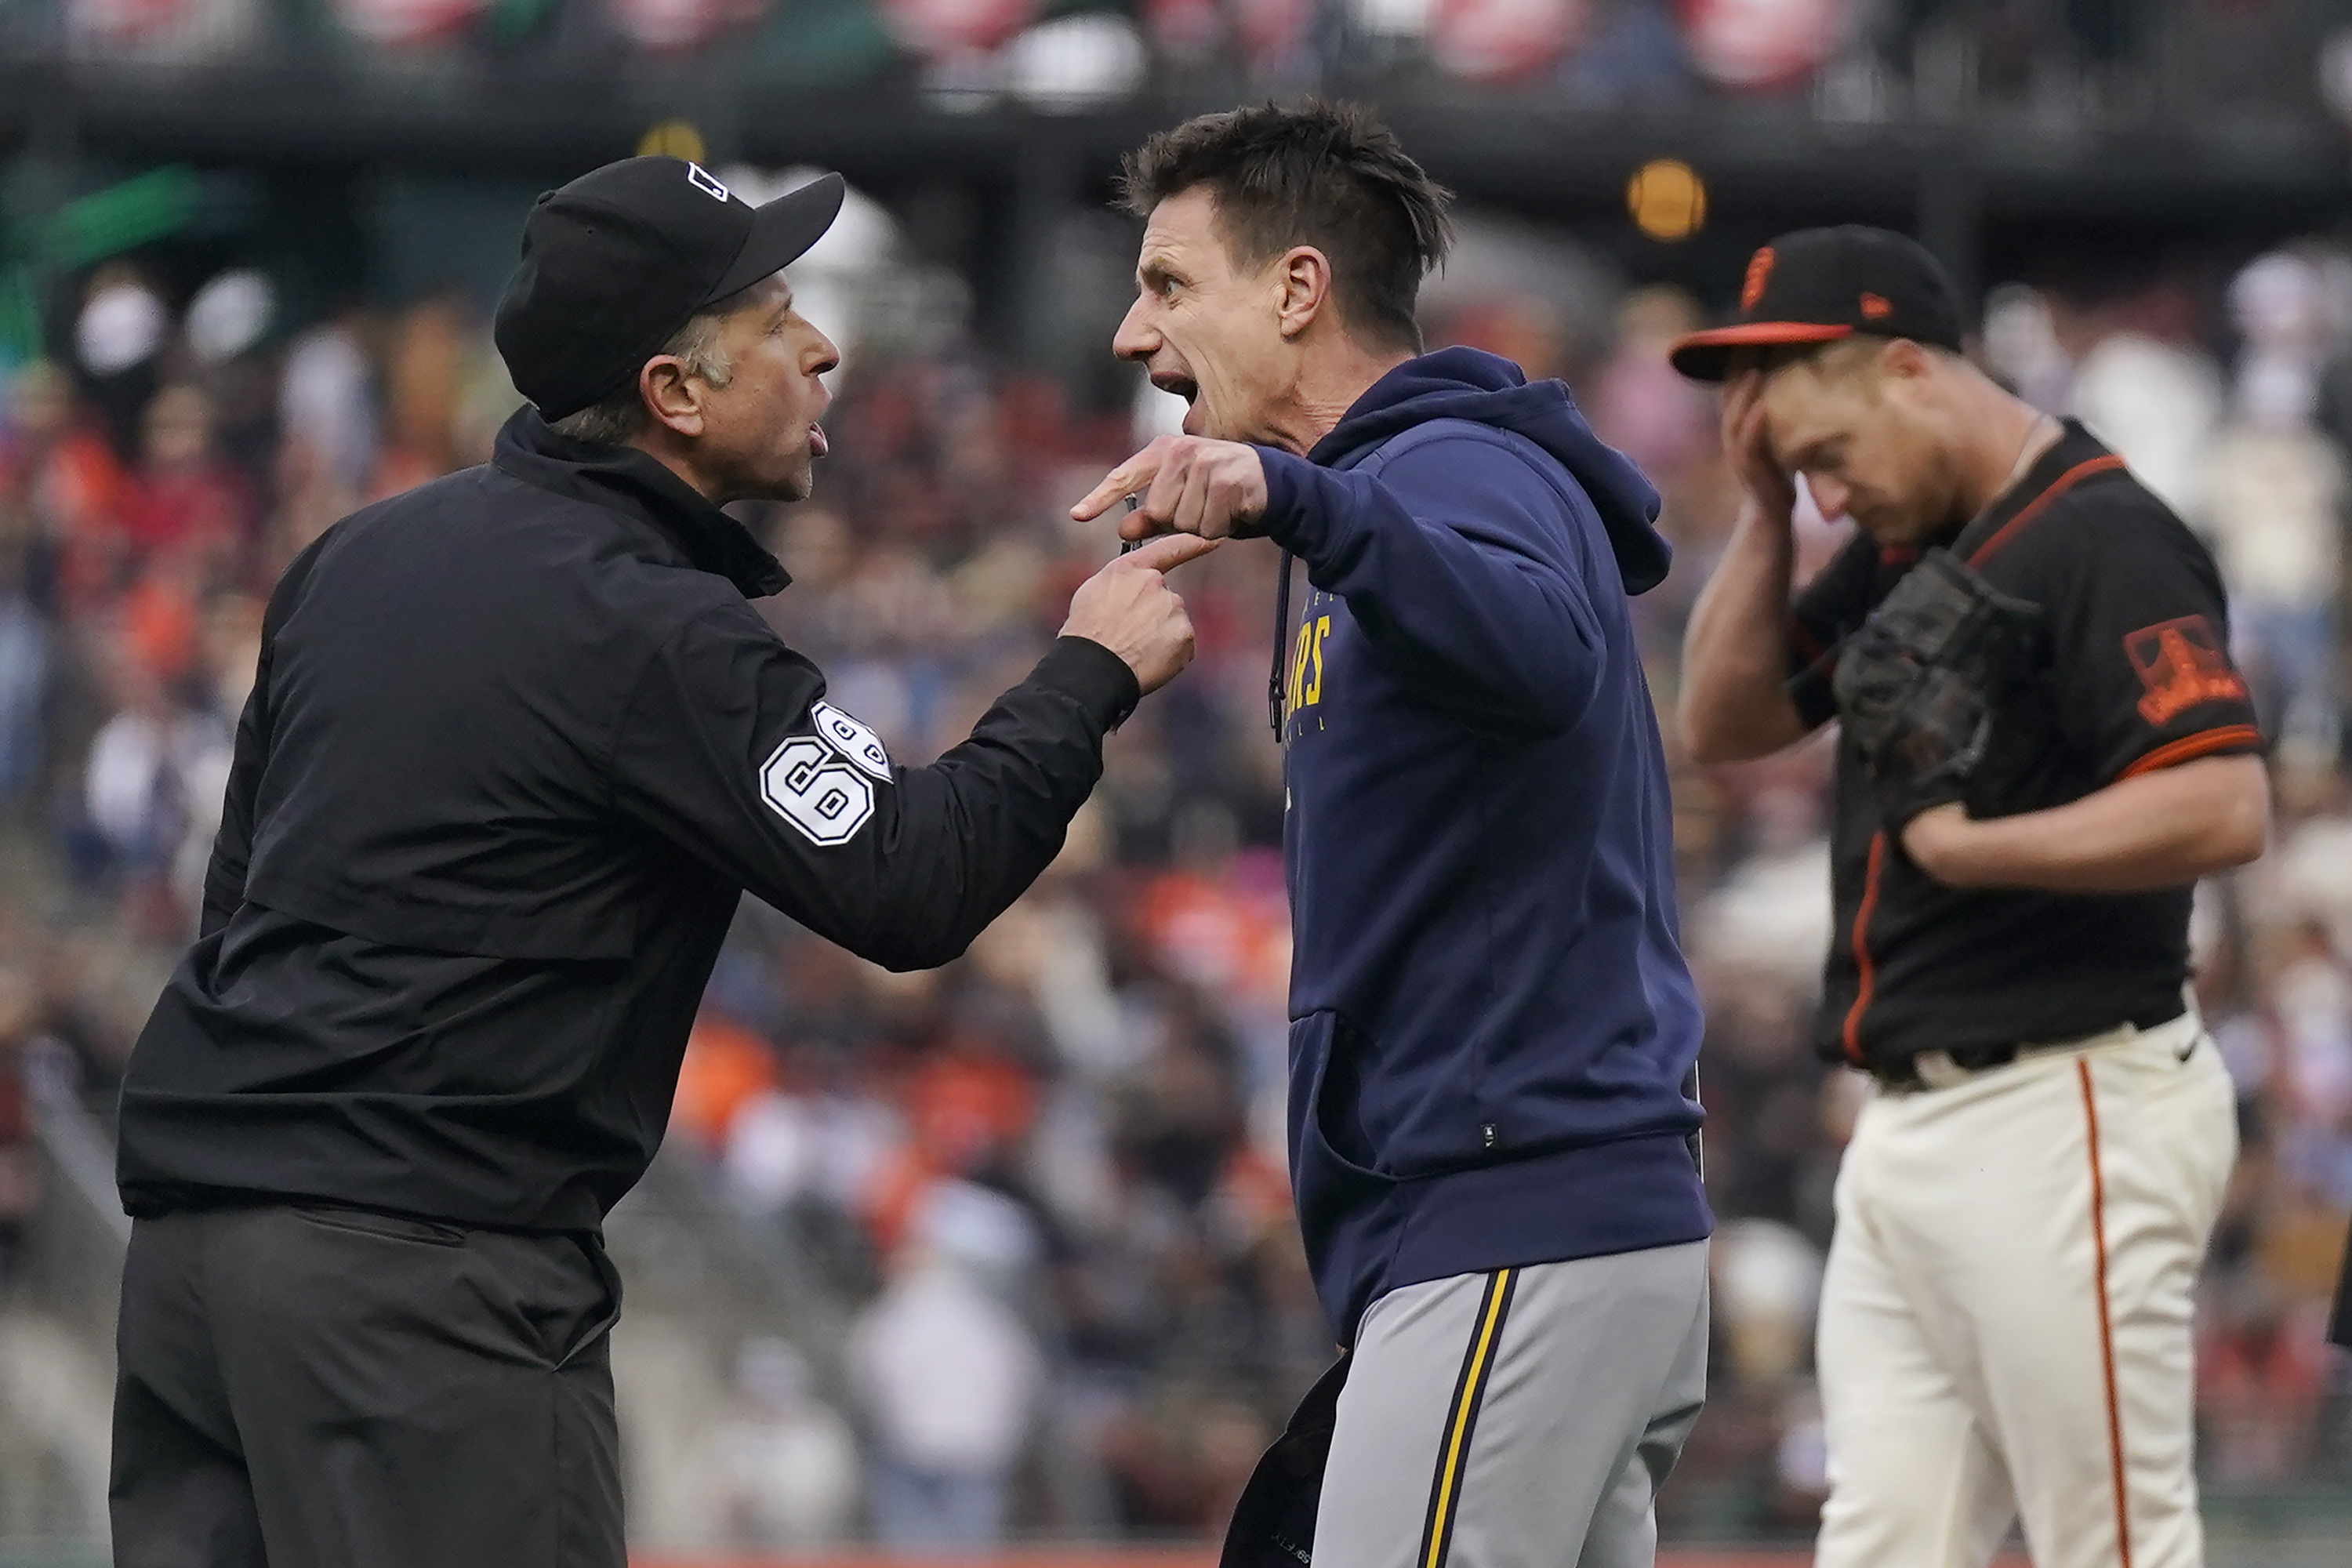 Brewers extend losing streak with loss to Giants, Counsell ejected